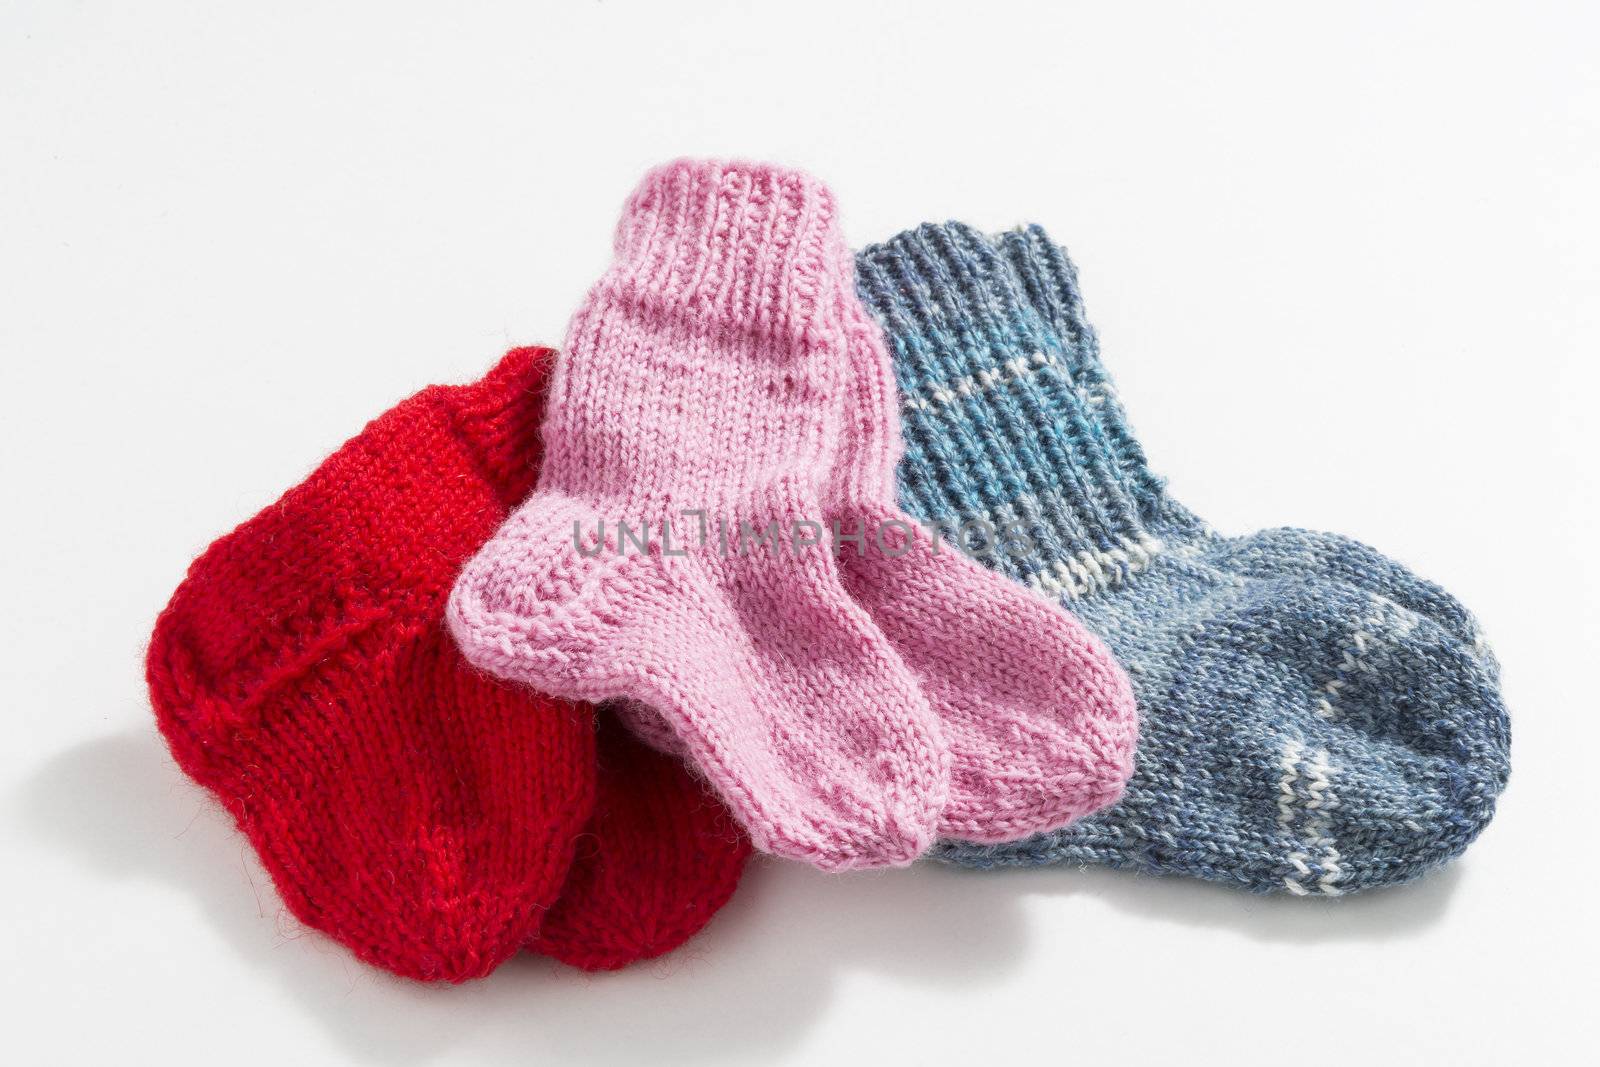 Hand-knitted baby socks on a white background